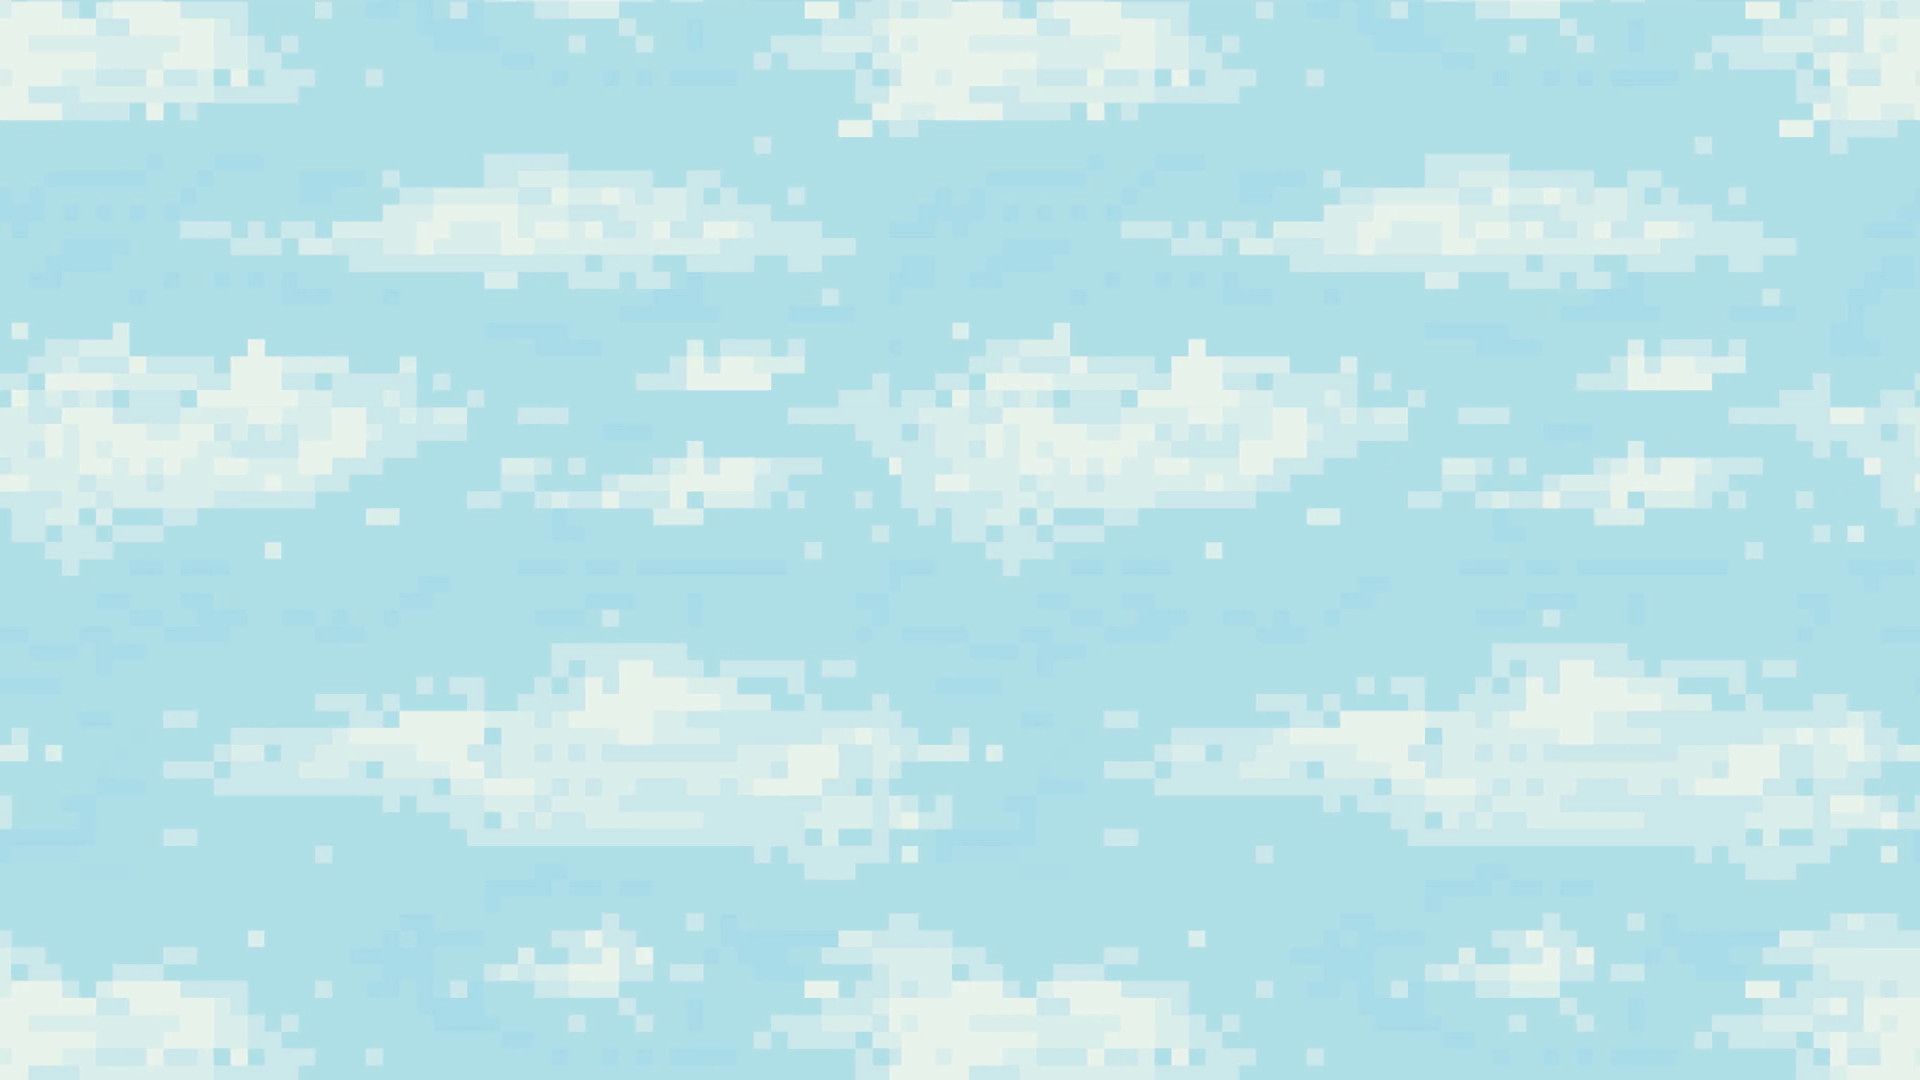 1920x1080 Retro video game pixel art blue sky background. Pixelated clouds HD  animation. Stock Video Footage - VideoBlocks